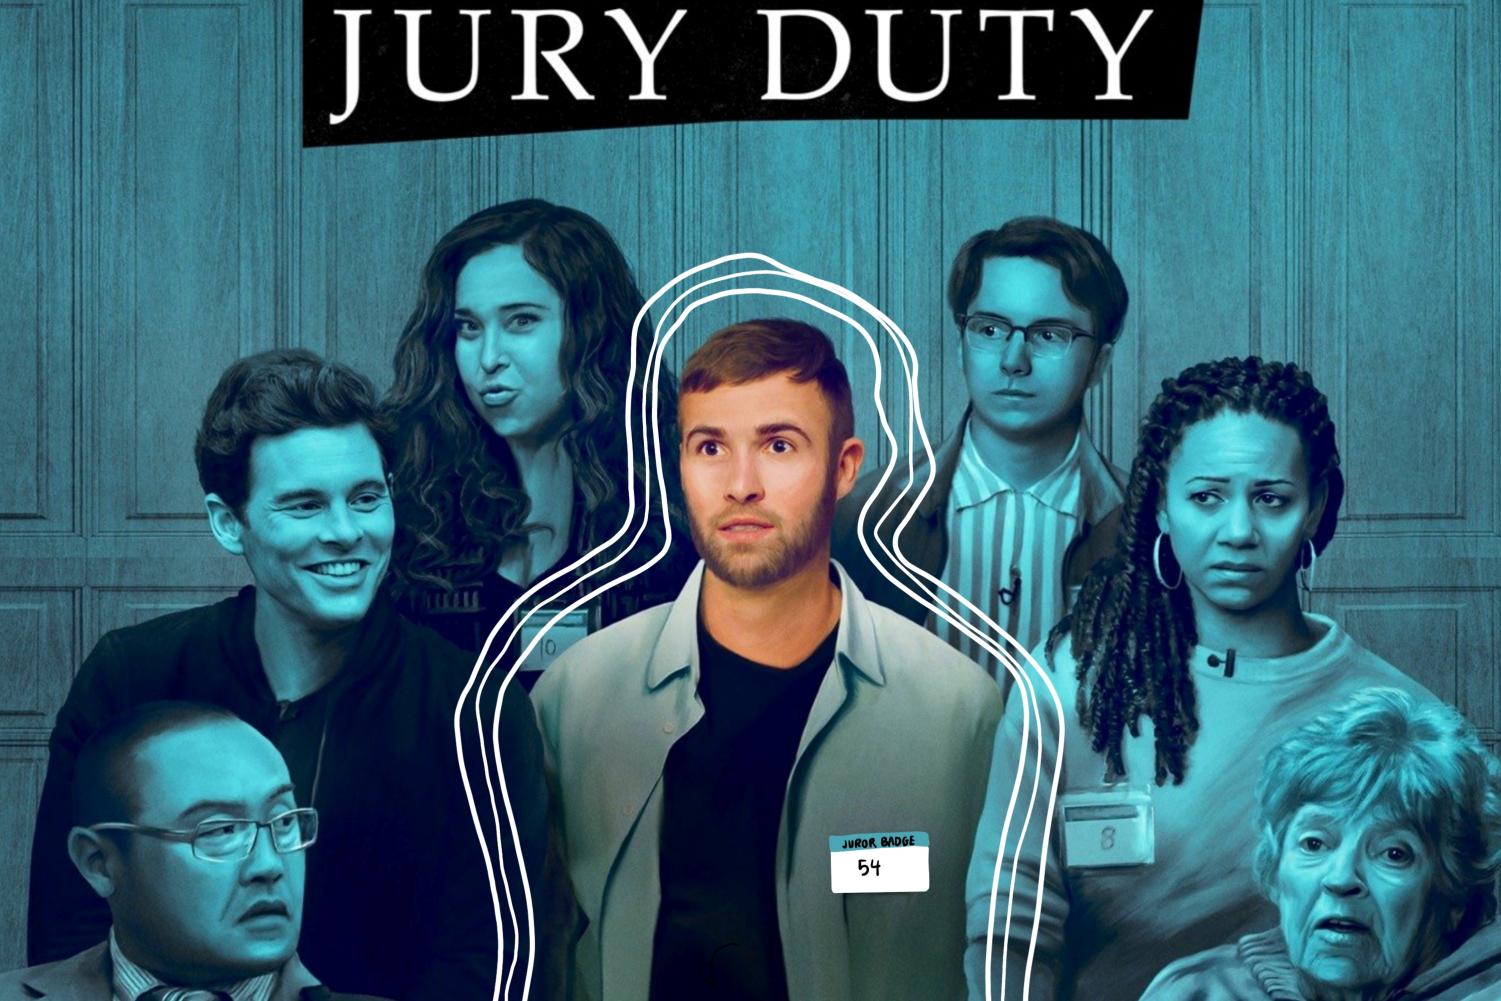 Reel Thoughts ‘Jury Duty’ could be the most wholesome show of 2023